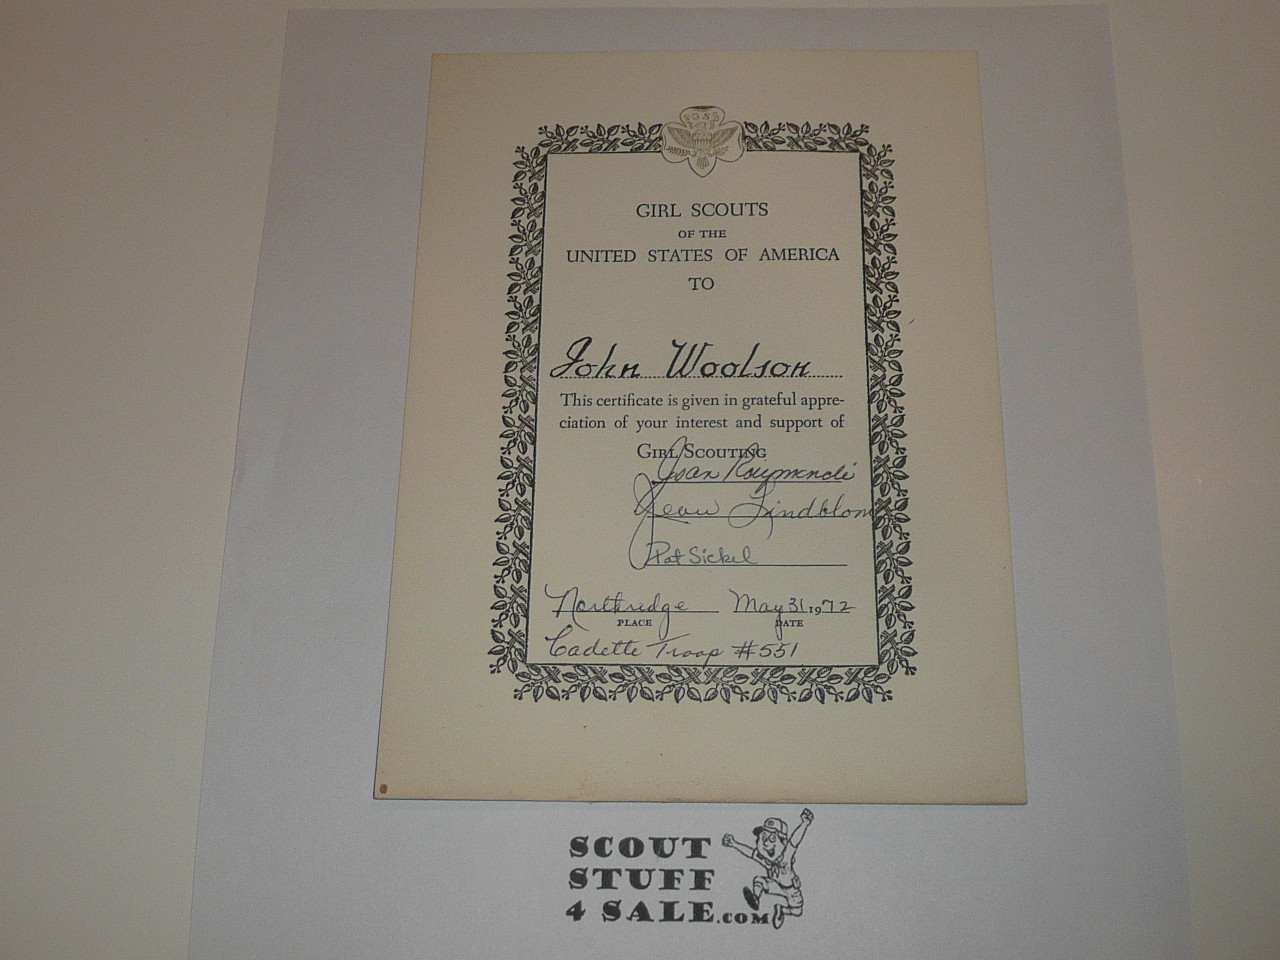 1972 Girl Scout National Issue Recognition Certificate